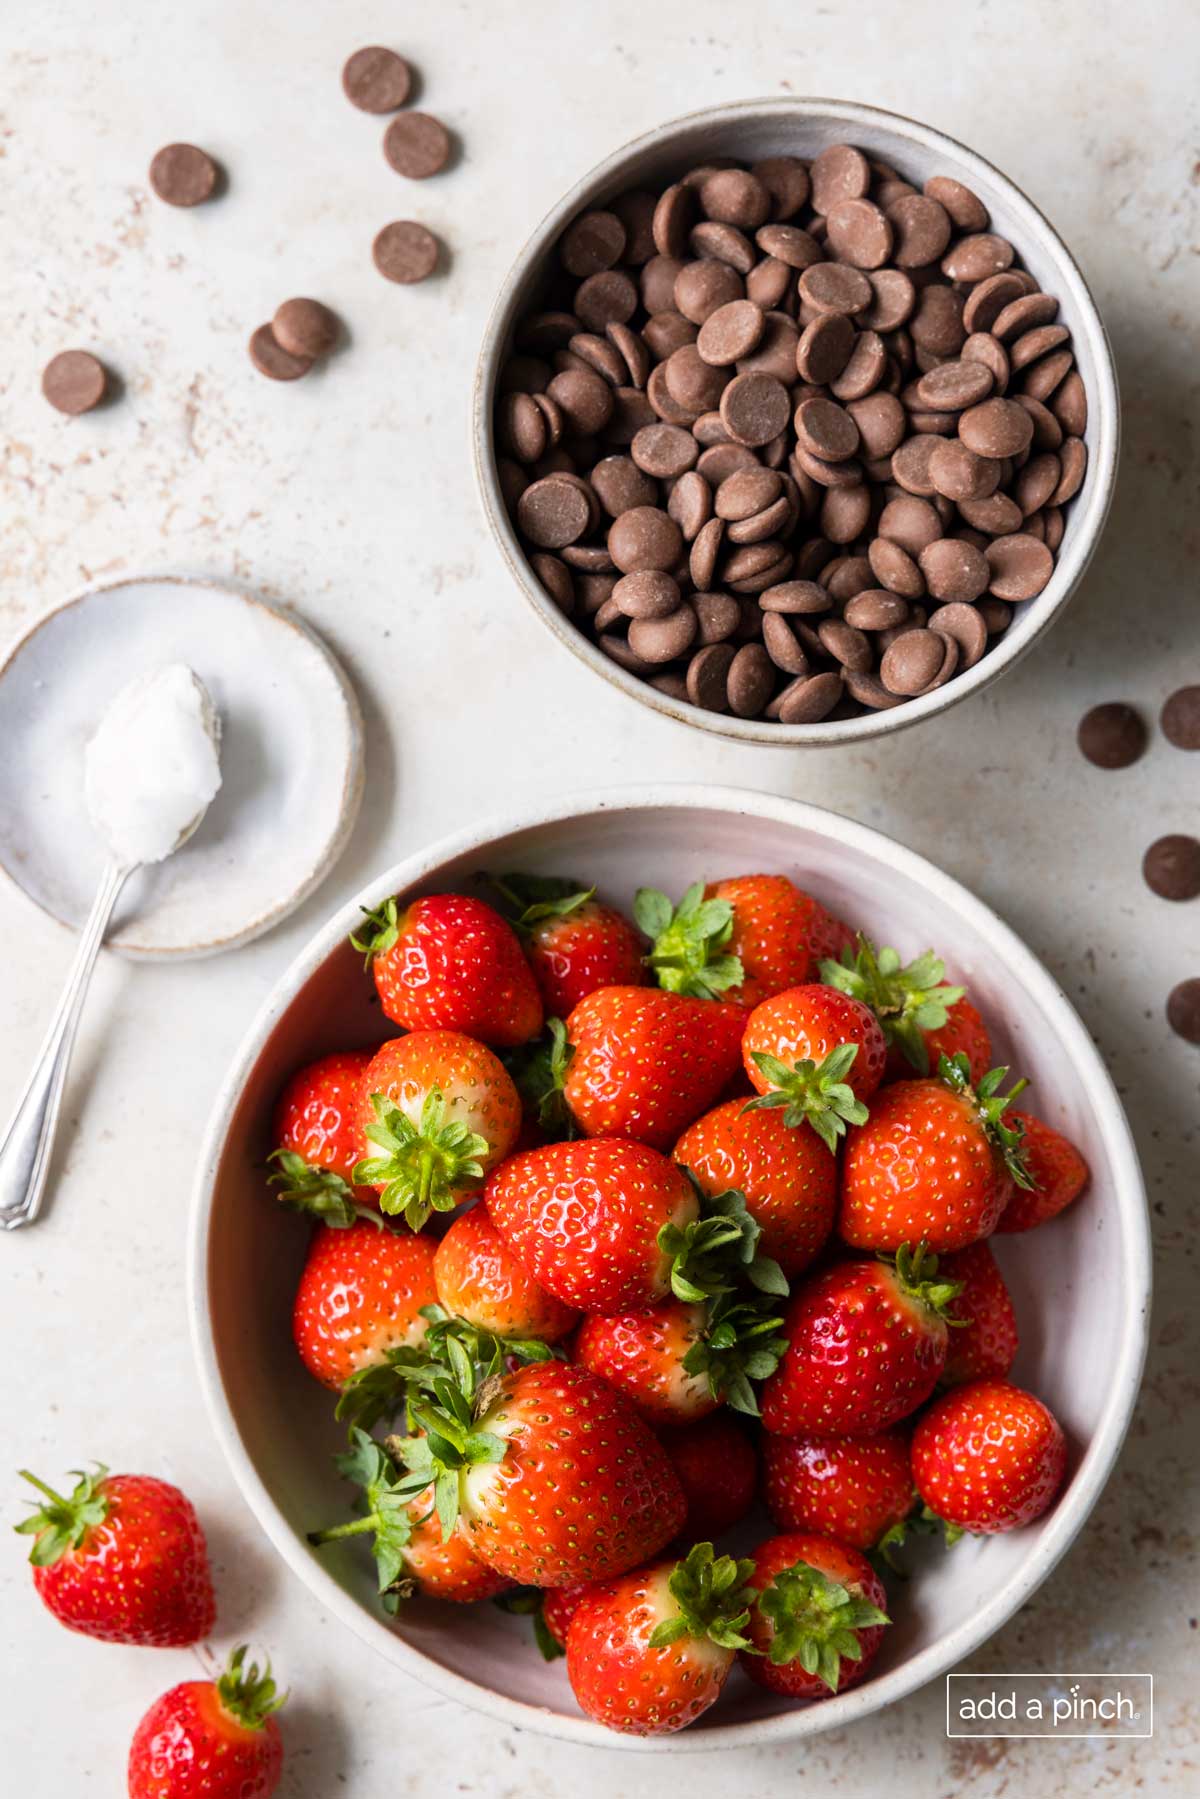 Ingredients to make chocolate covered strawberries.